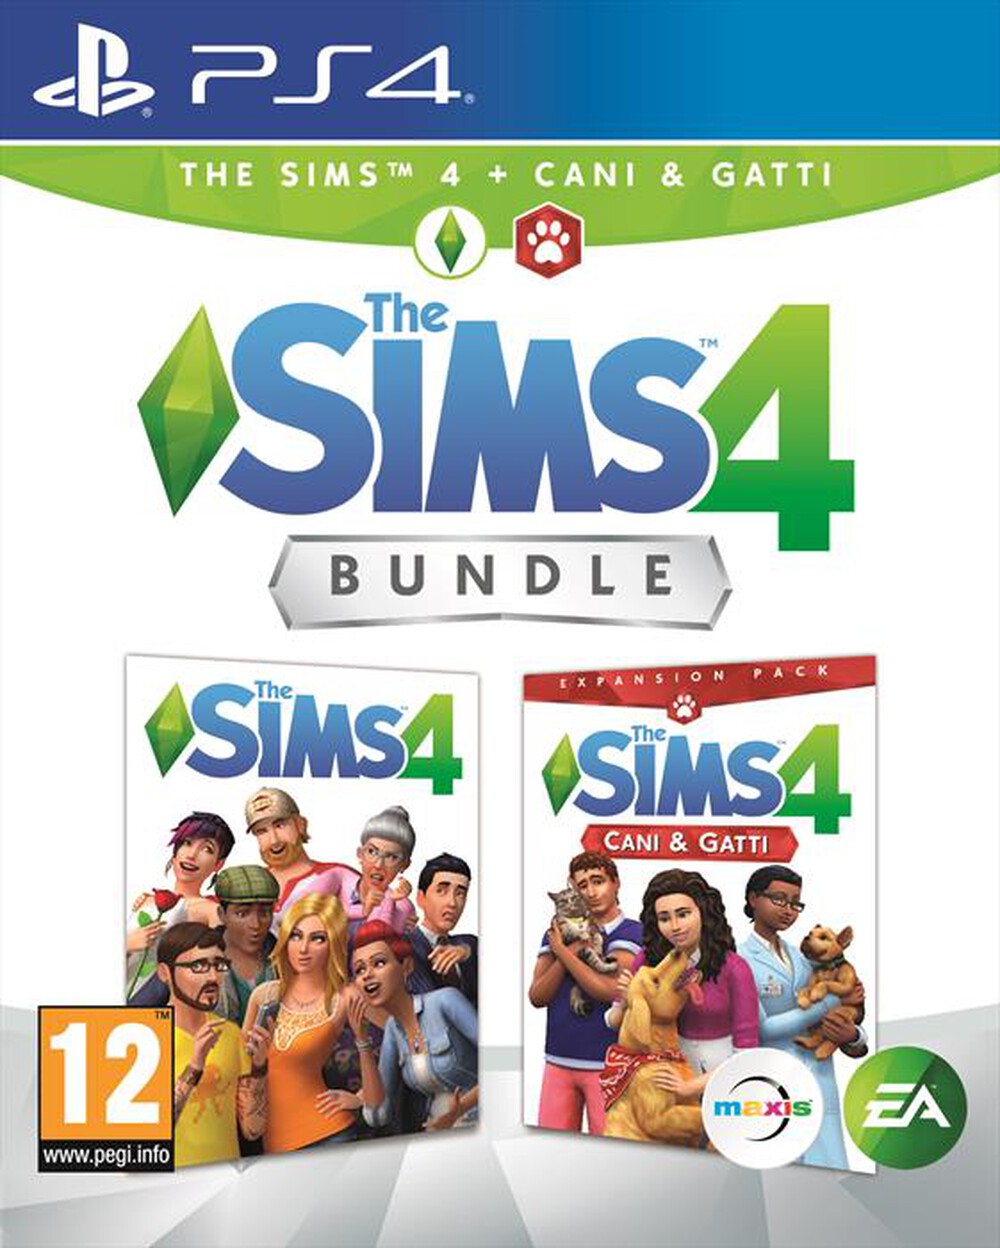 "ELECTRONIC ARTS - THE SIMS 4 PLUS CATS AND DOGS BUNDLE XBOX ONE"